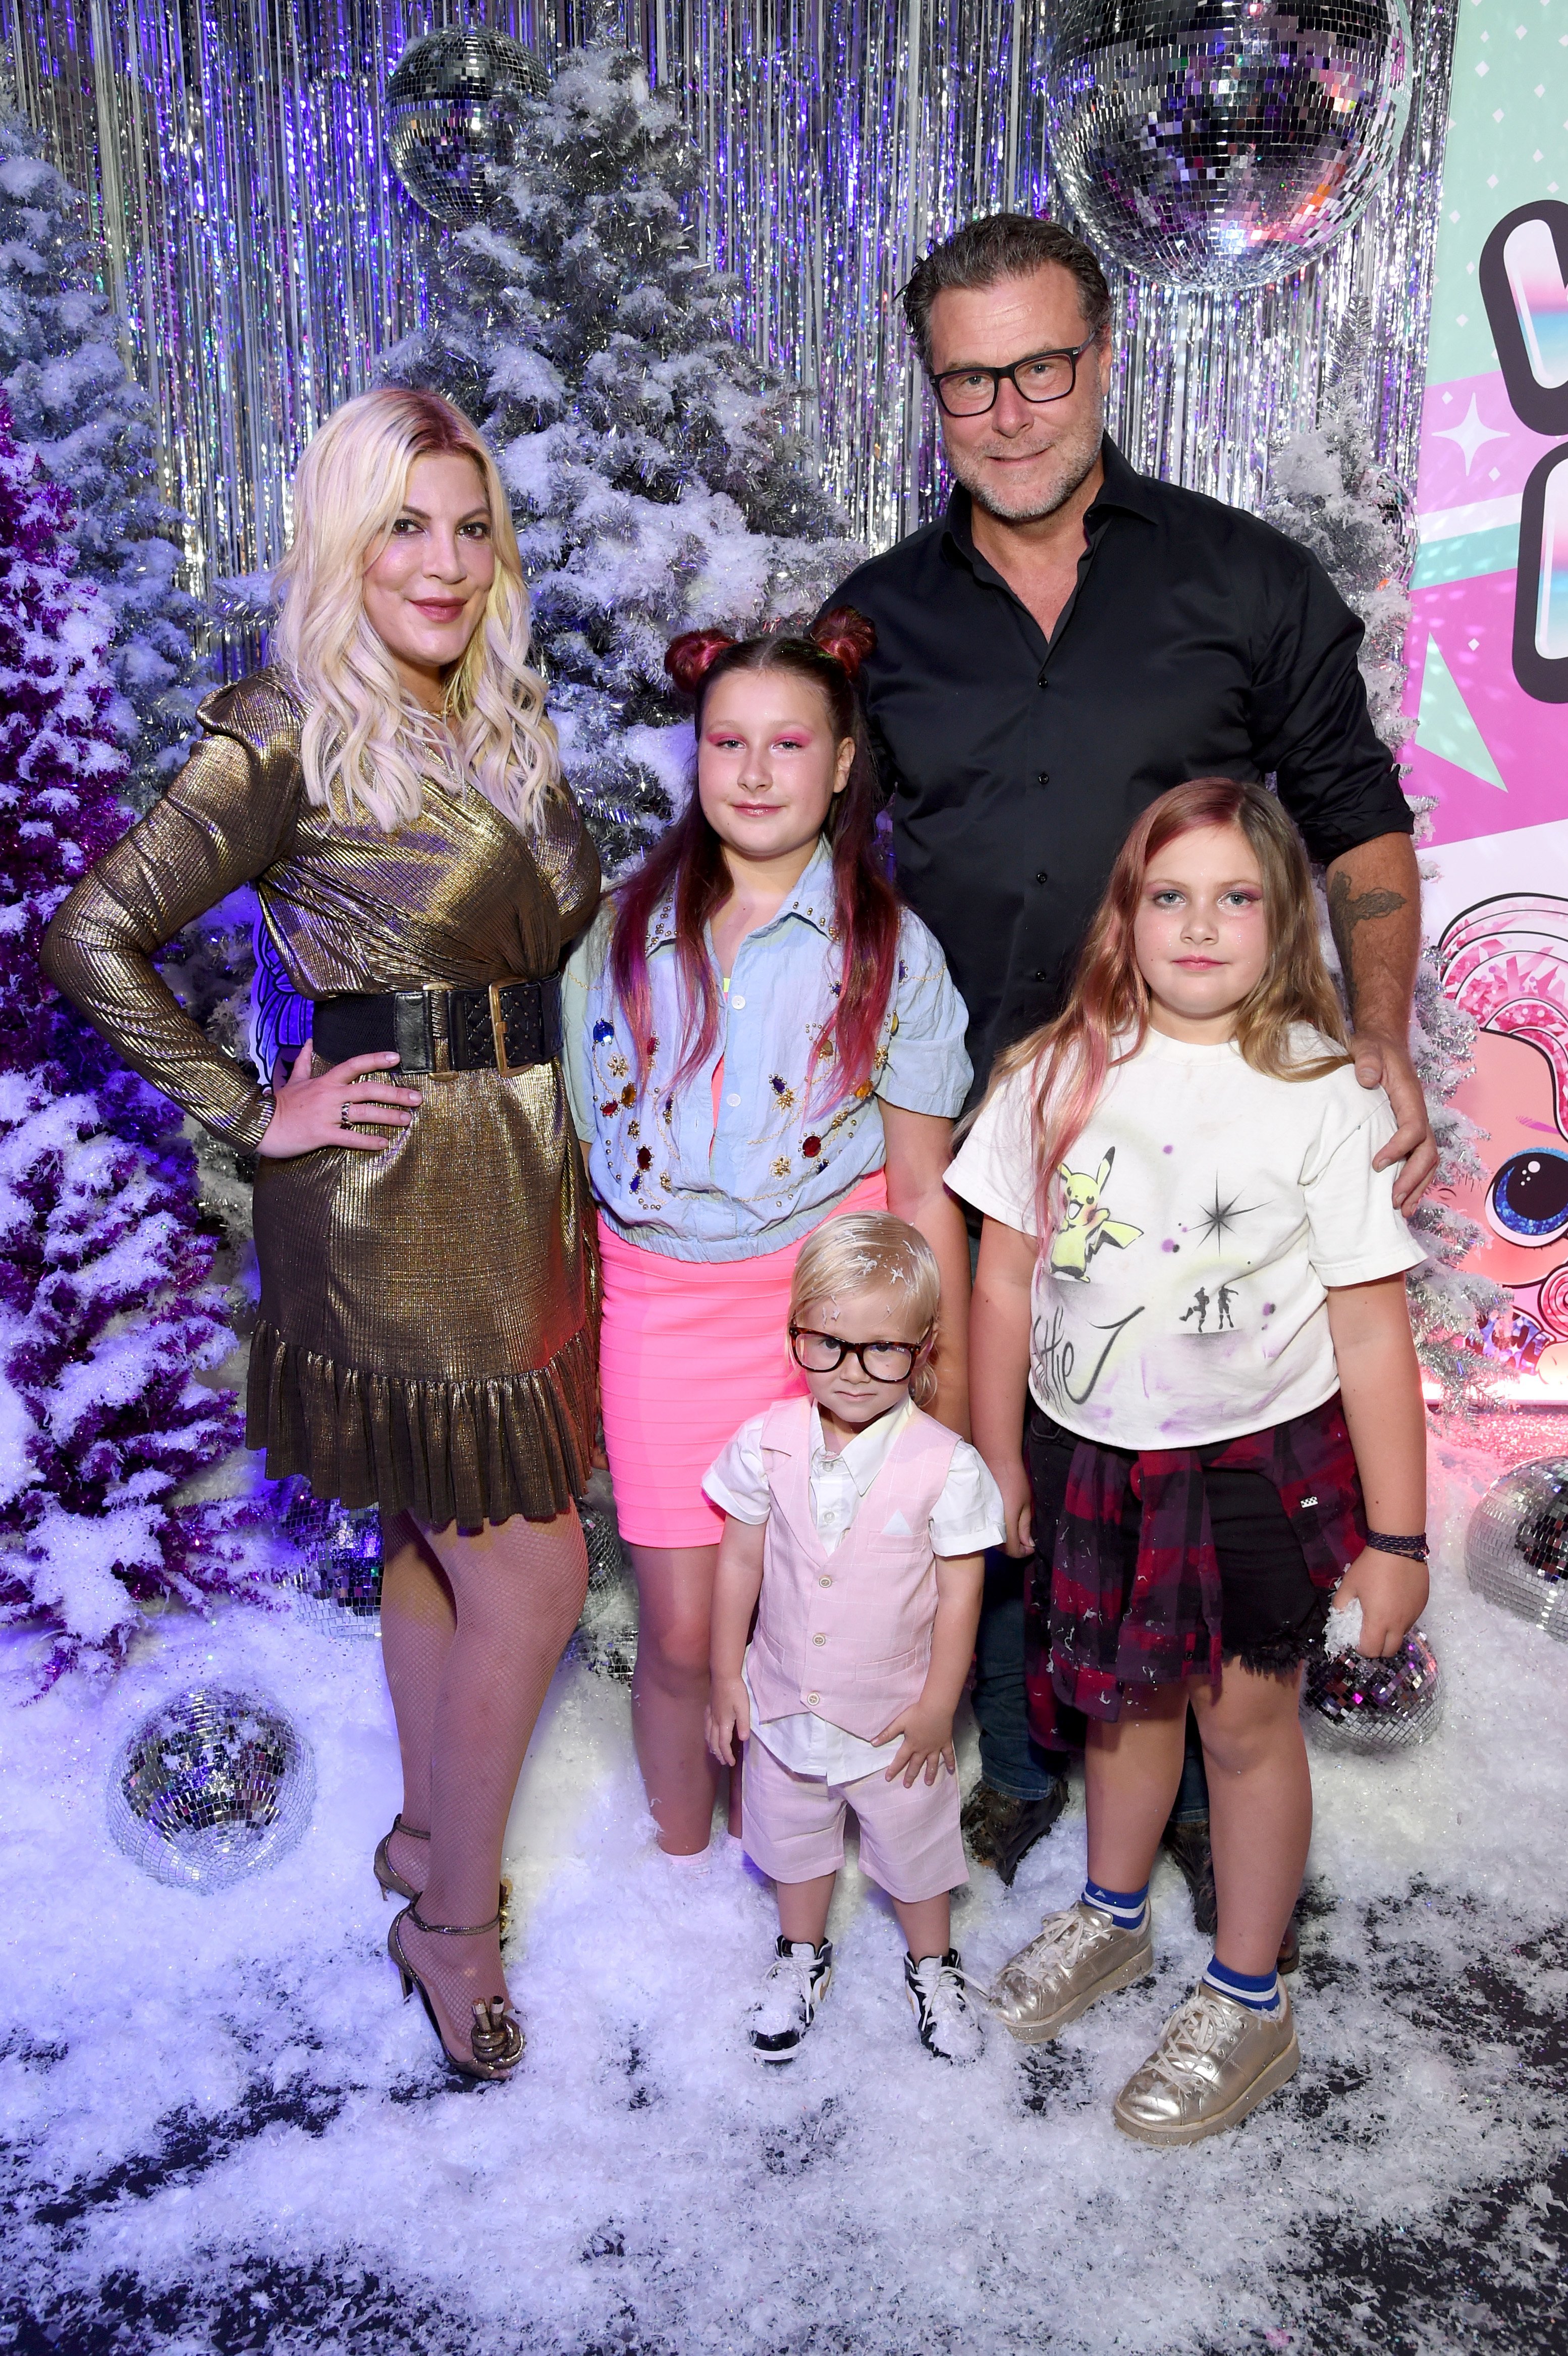 Tori Spelling and Dean McDermot with three of their kids attend L.O.L. Surprise! Winter Disco Launch Party in Los Angeles, California on September 27, 2019 | Photo: Getty Images